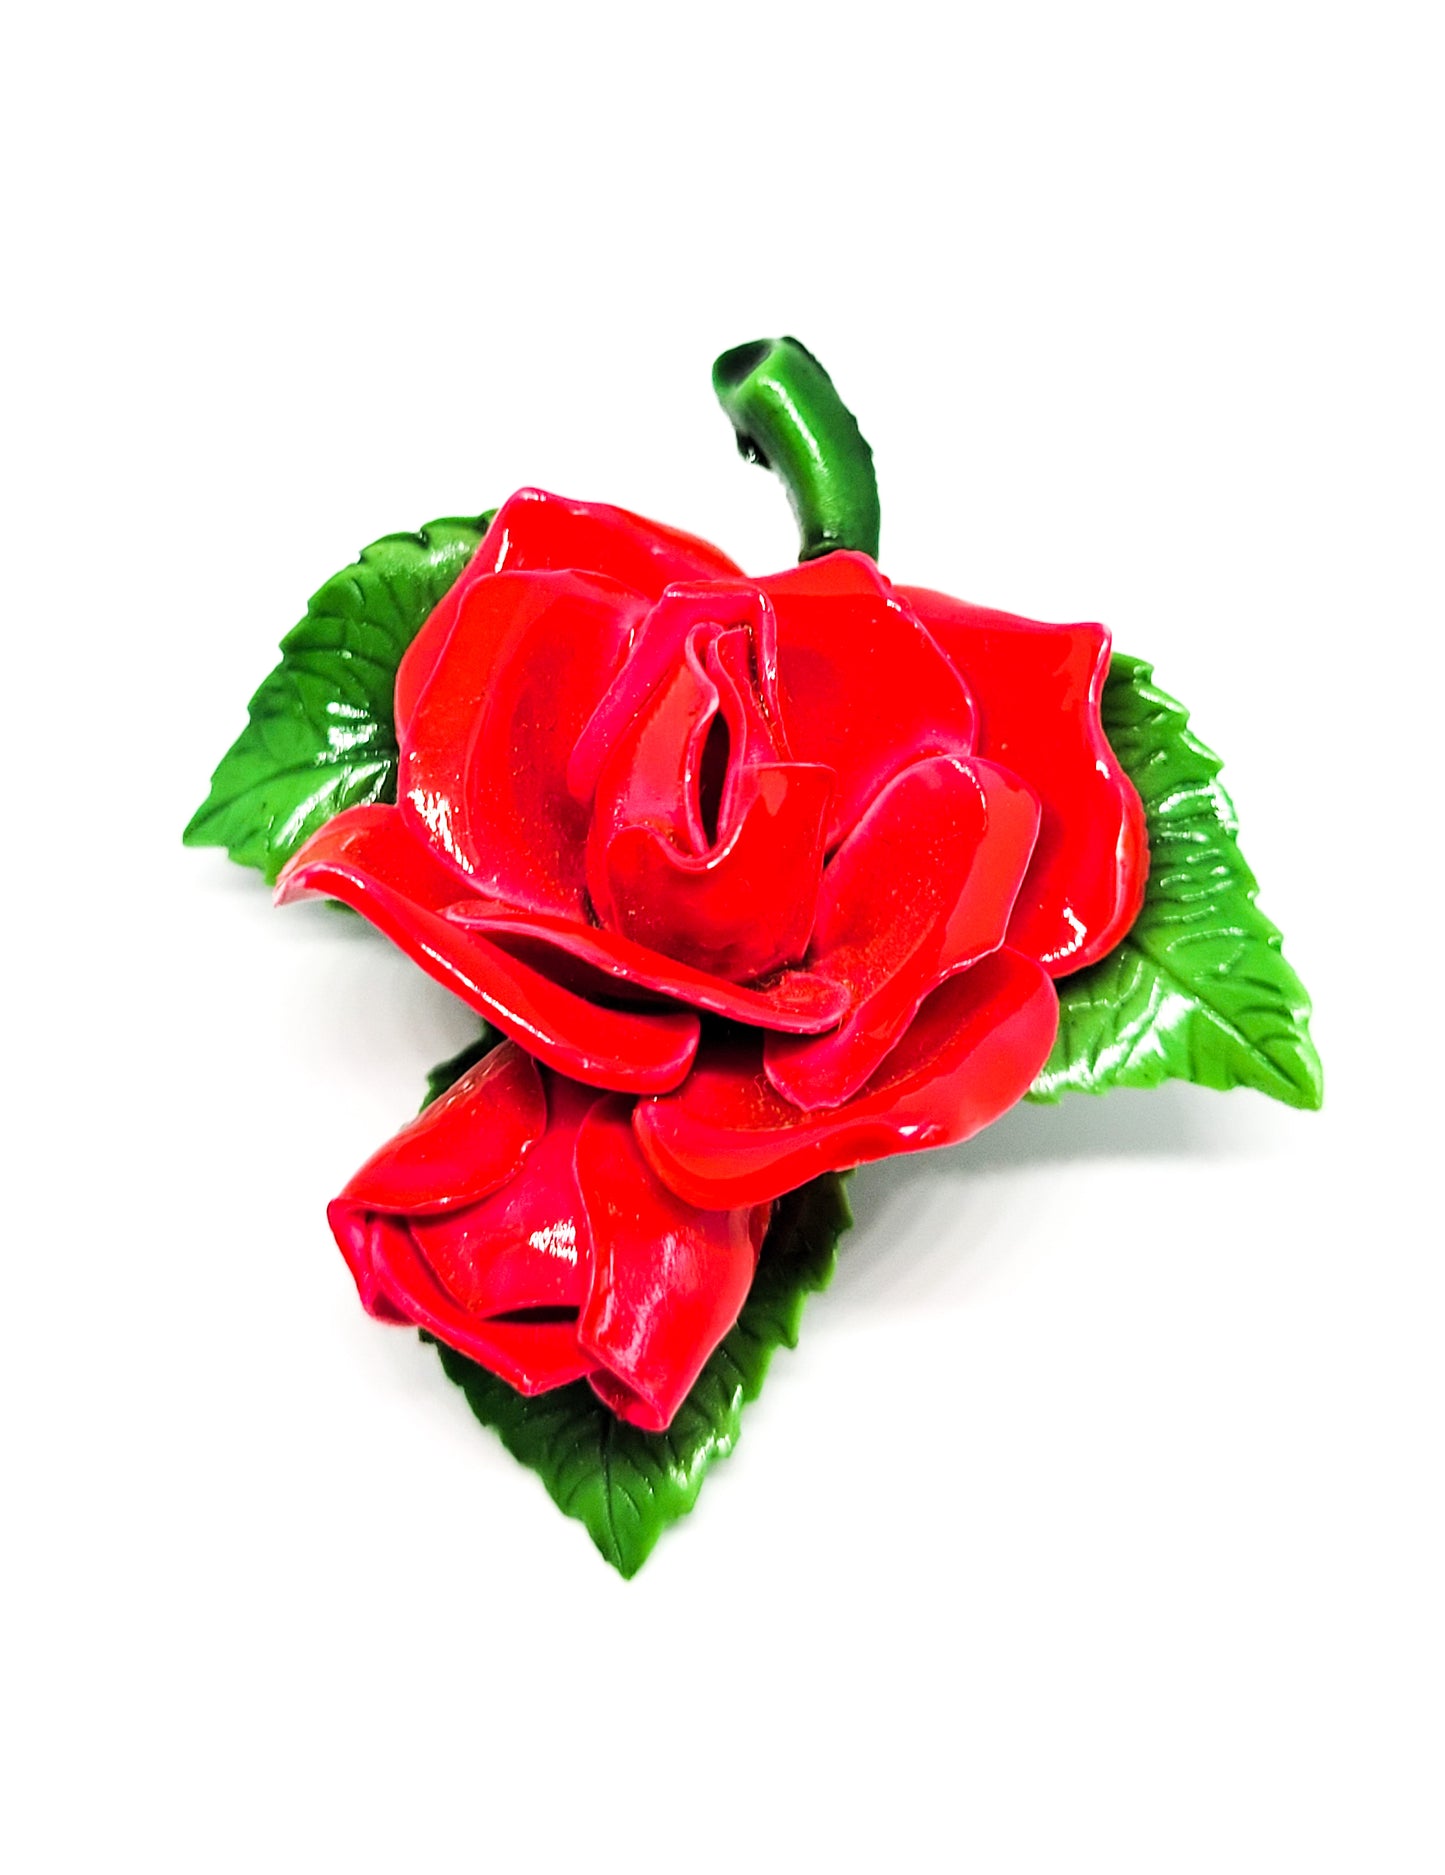 Red Rose Enamel painted vintage brooch with green leaf accents